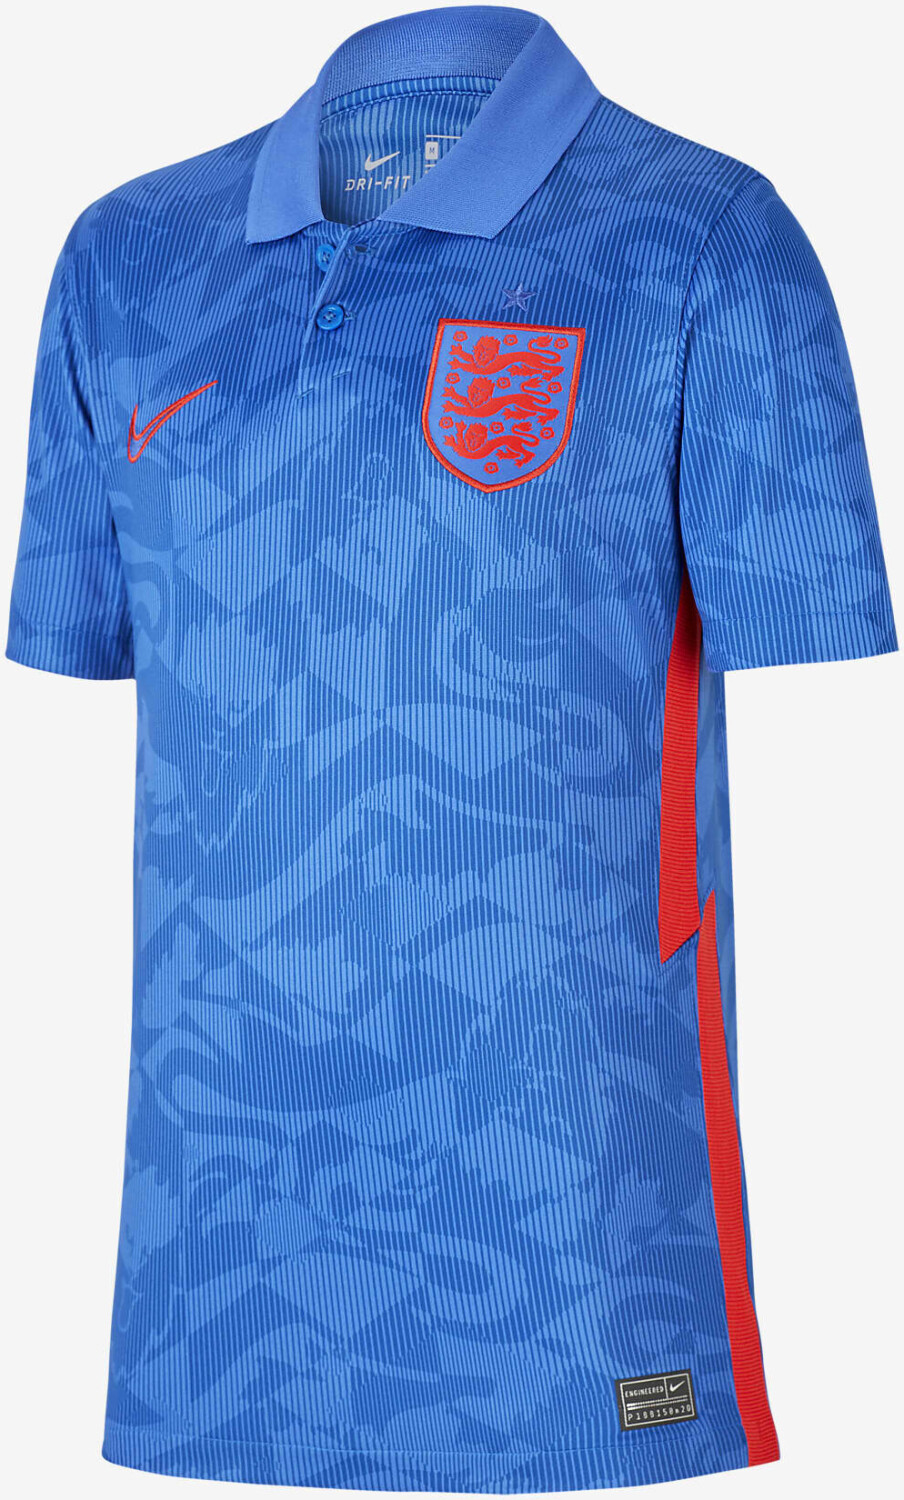 Buy Nike England Away Shirt 2020 Youth from £54.95 (Today) Best Deals